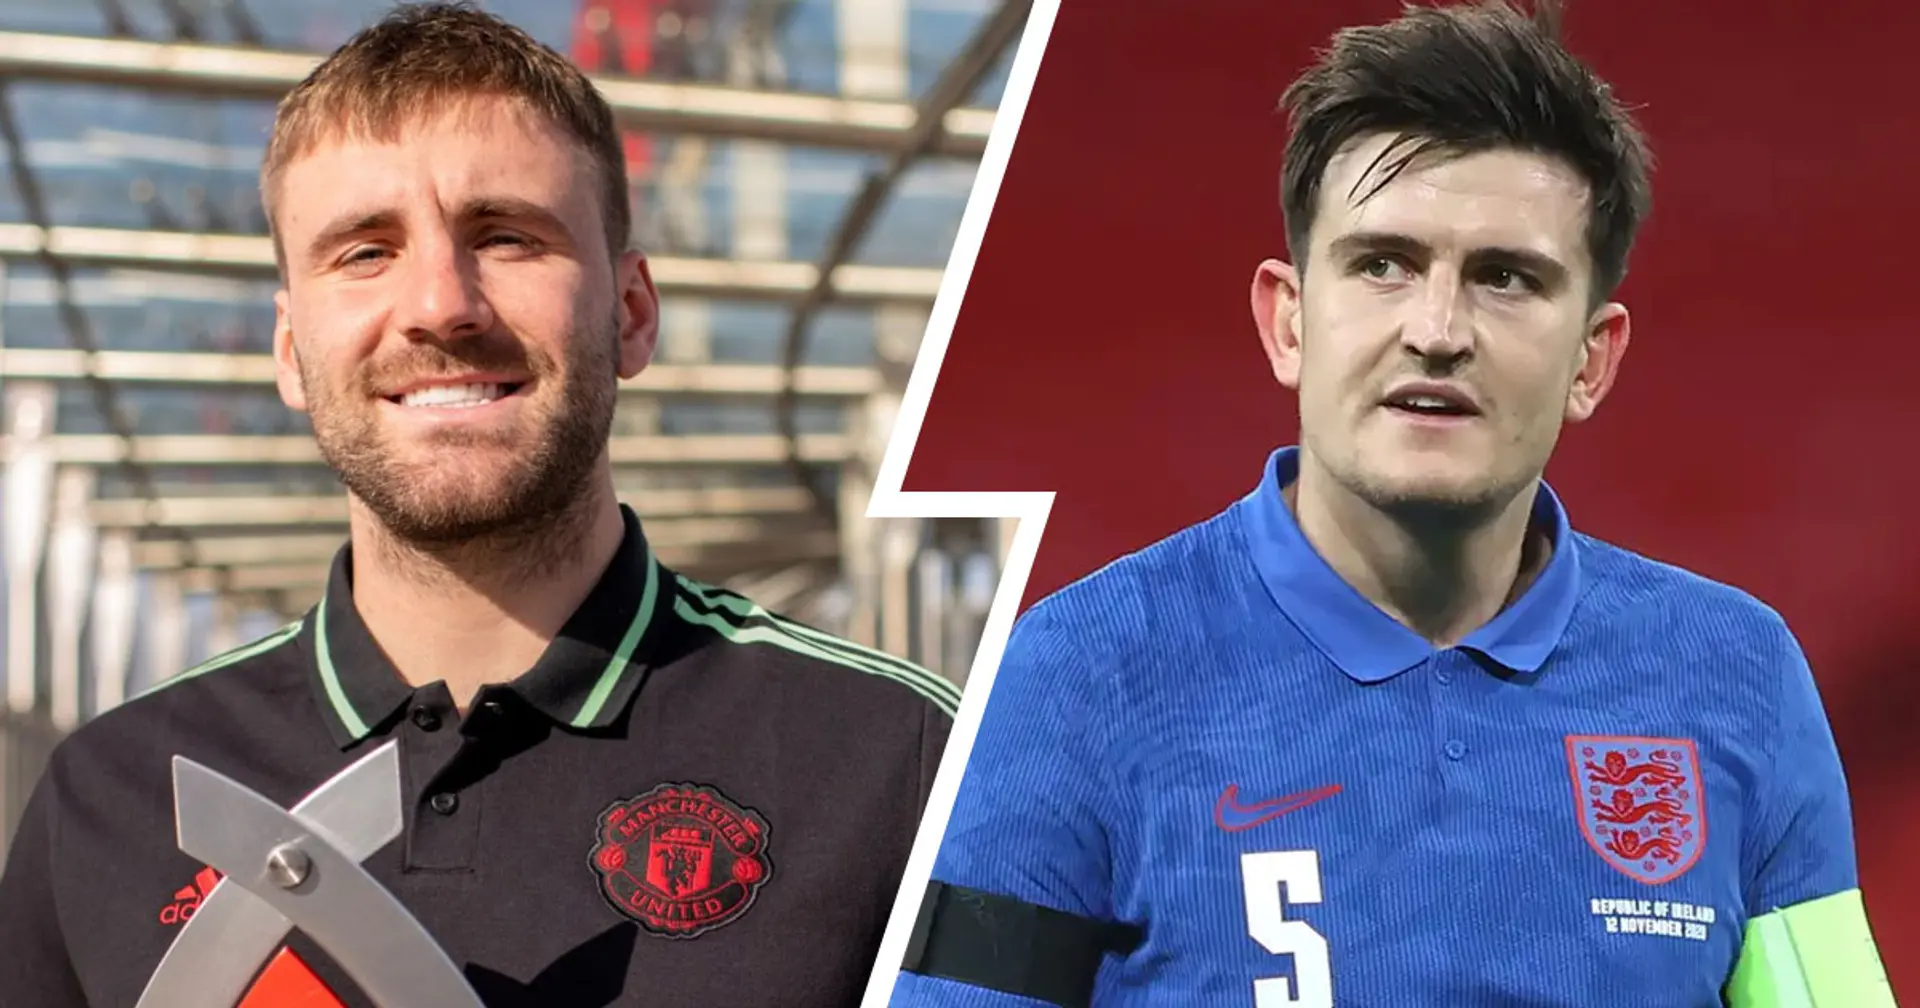 Maguire: 'I'm delighted for Luke Shaw. He's thoroughly deserved the England call-up'